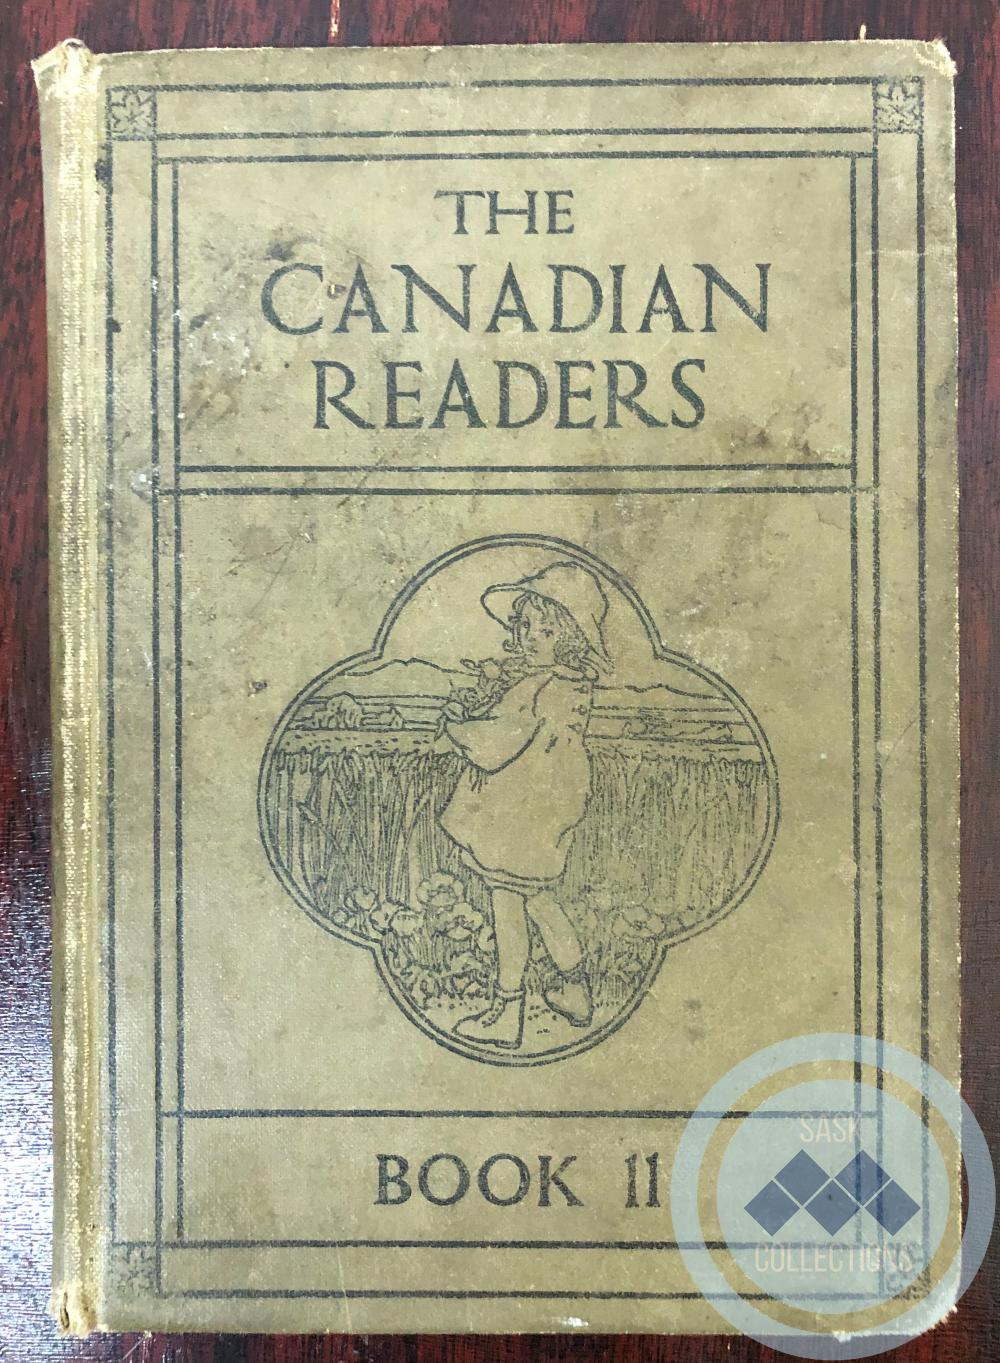 The Canadian Readers - Book II